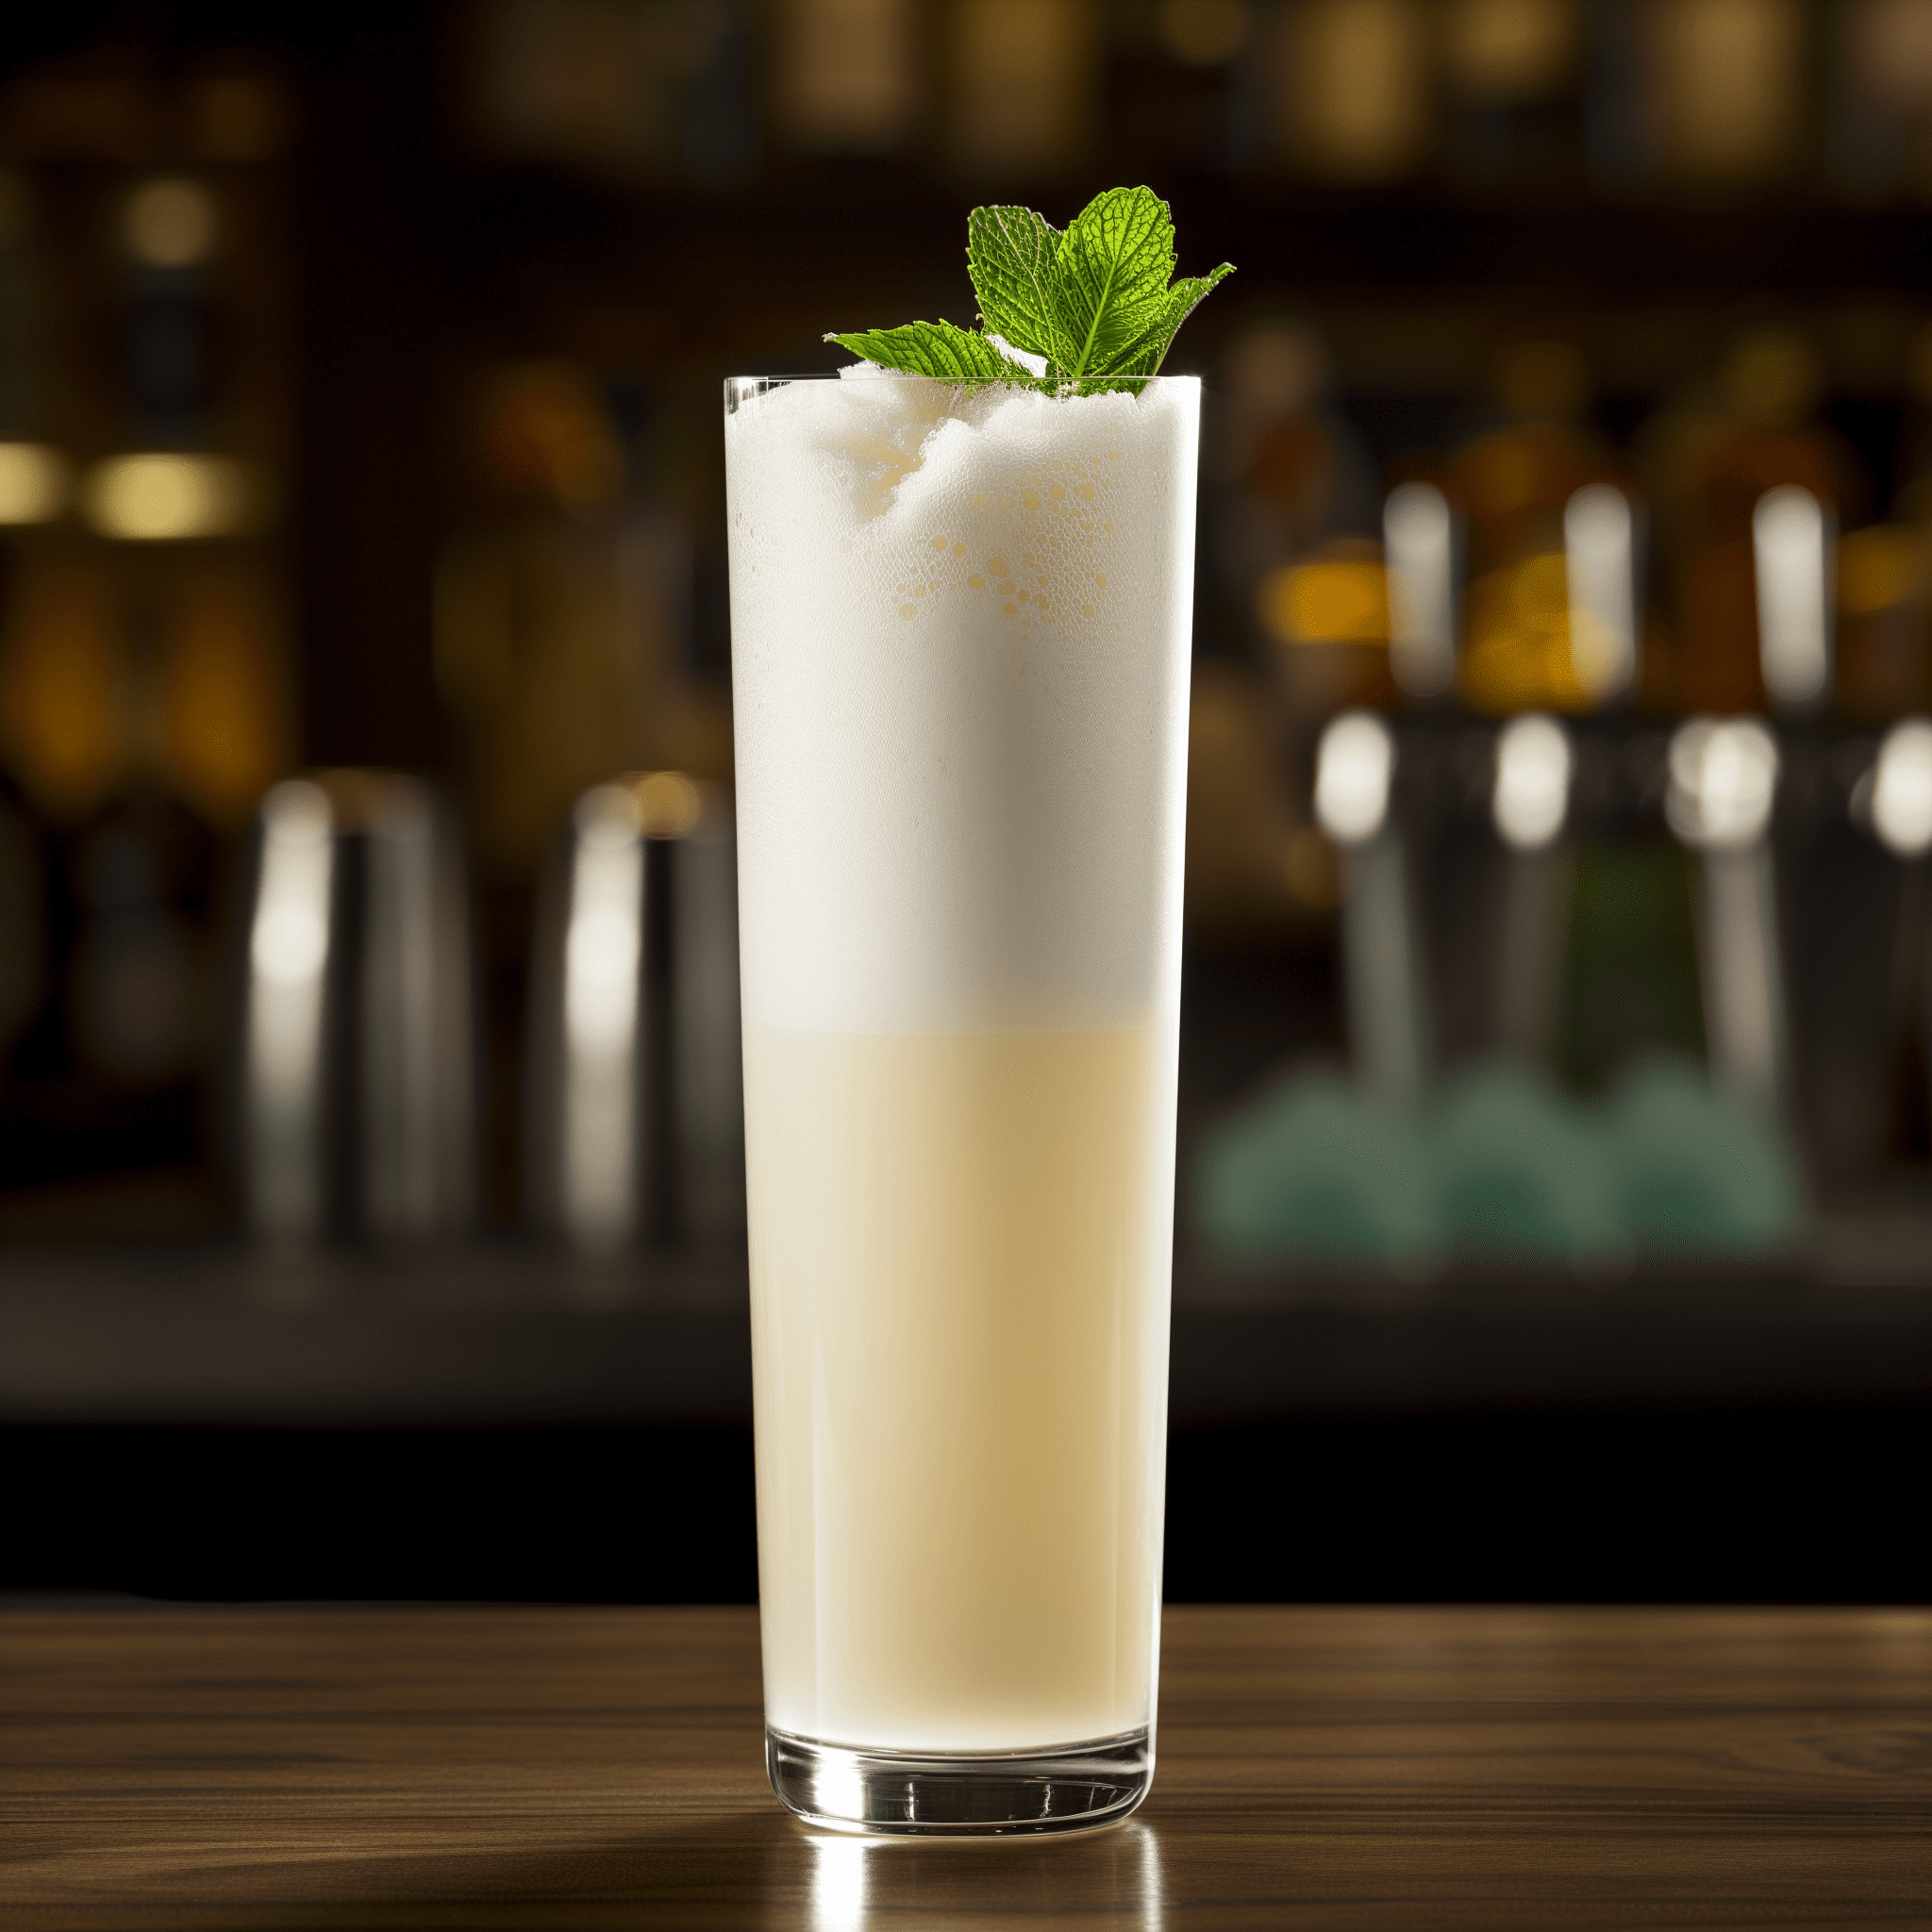 White Gin Fizz Cocktail Recipe - The White Gin Fizz offers a delightful balance of creamy and effervescent textures, with a refreshing citrus tang complemented by the botanicals of gin. It's slightly sweet, a touch sour, and wonderfully frothy on top.